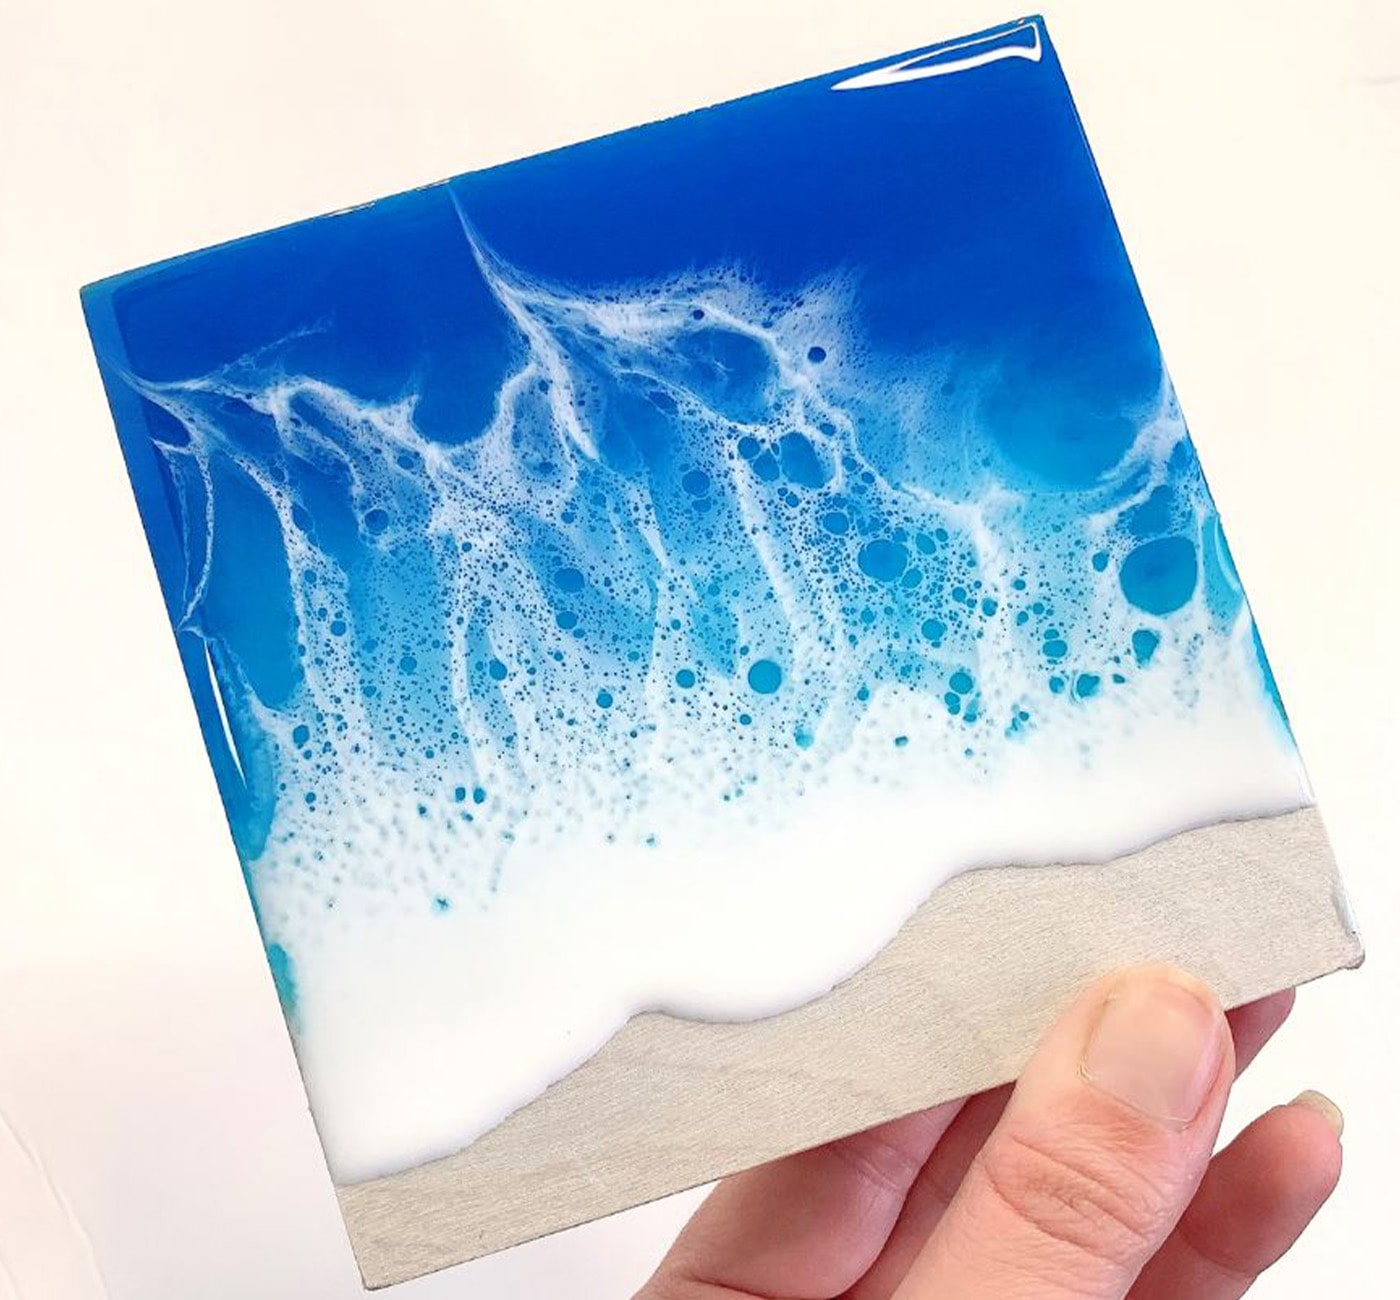 Resin coaster painted to look like rolling waves on a beach